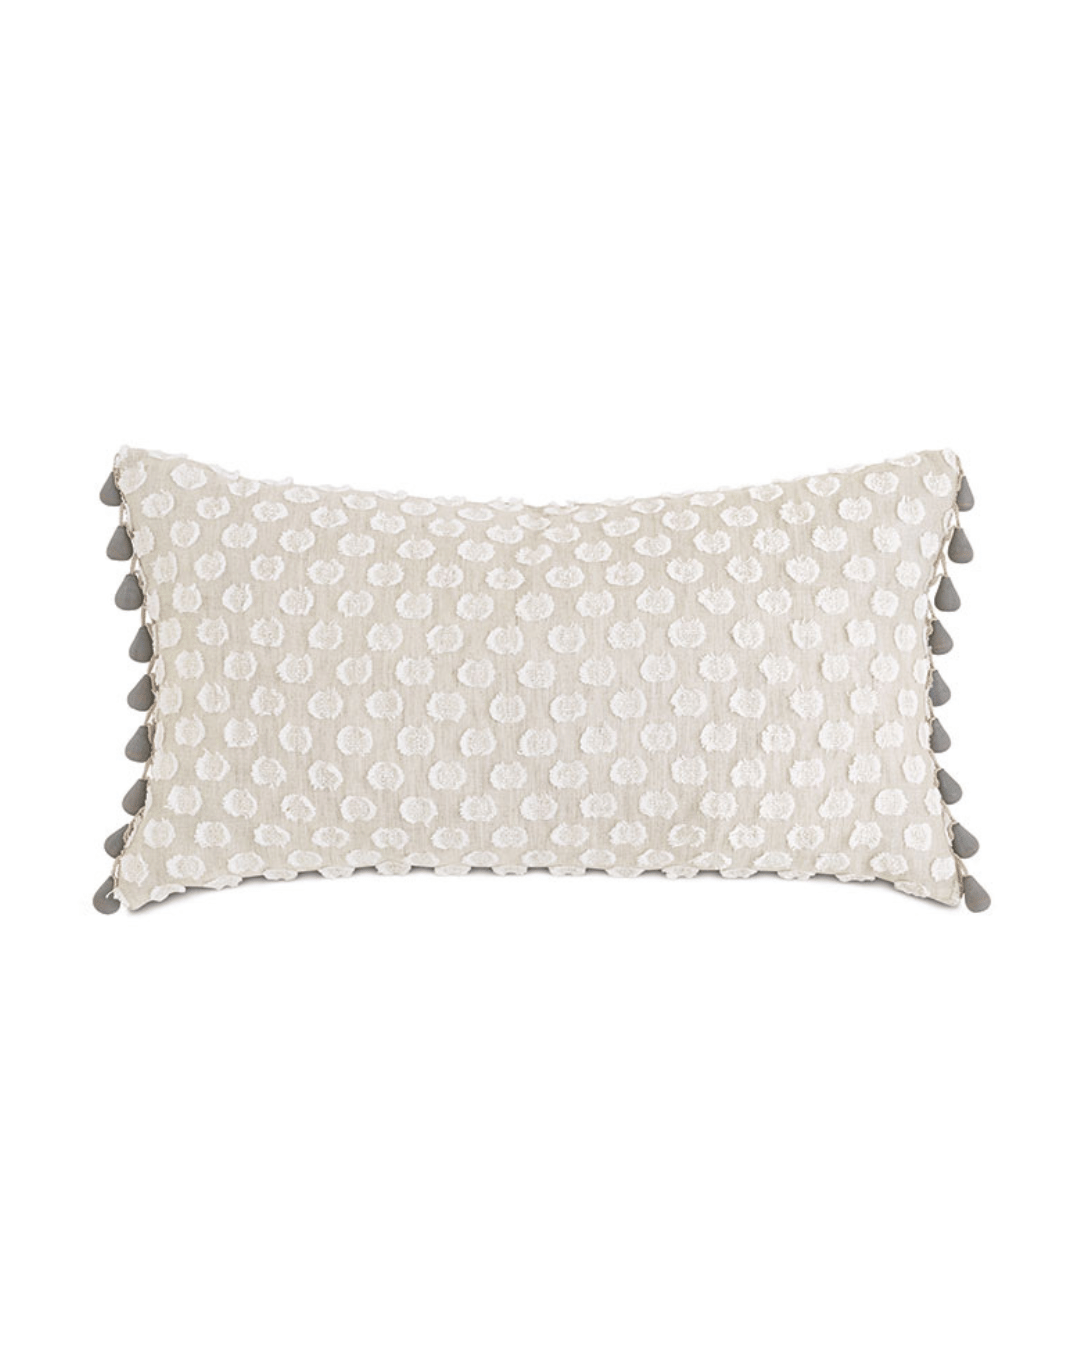 A rectangular beaded trim decorative pillow from Eastern Accents with a sequined white front and black tassel accents on the edges, set against a plain Arizona-style background.